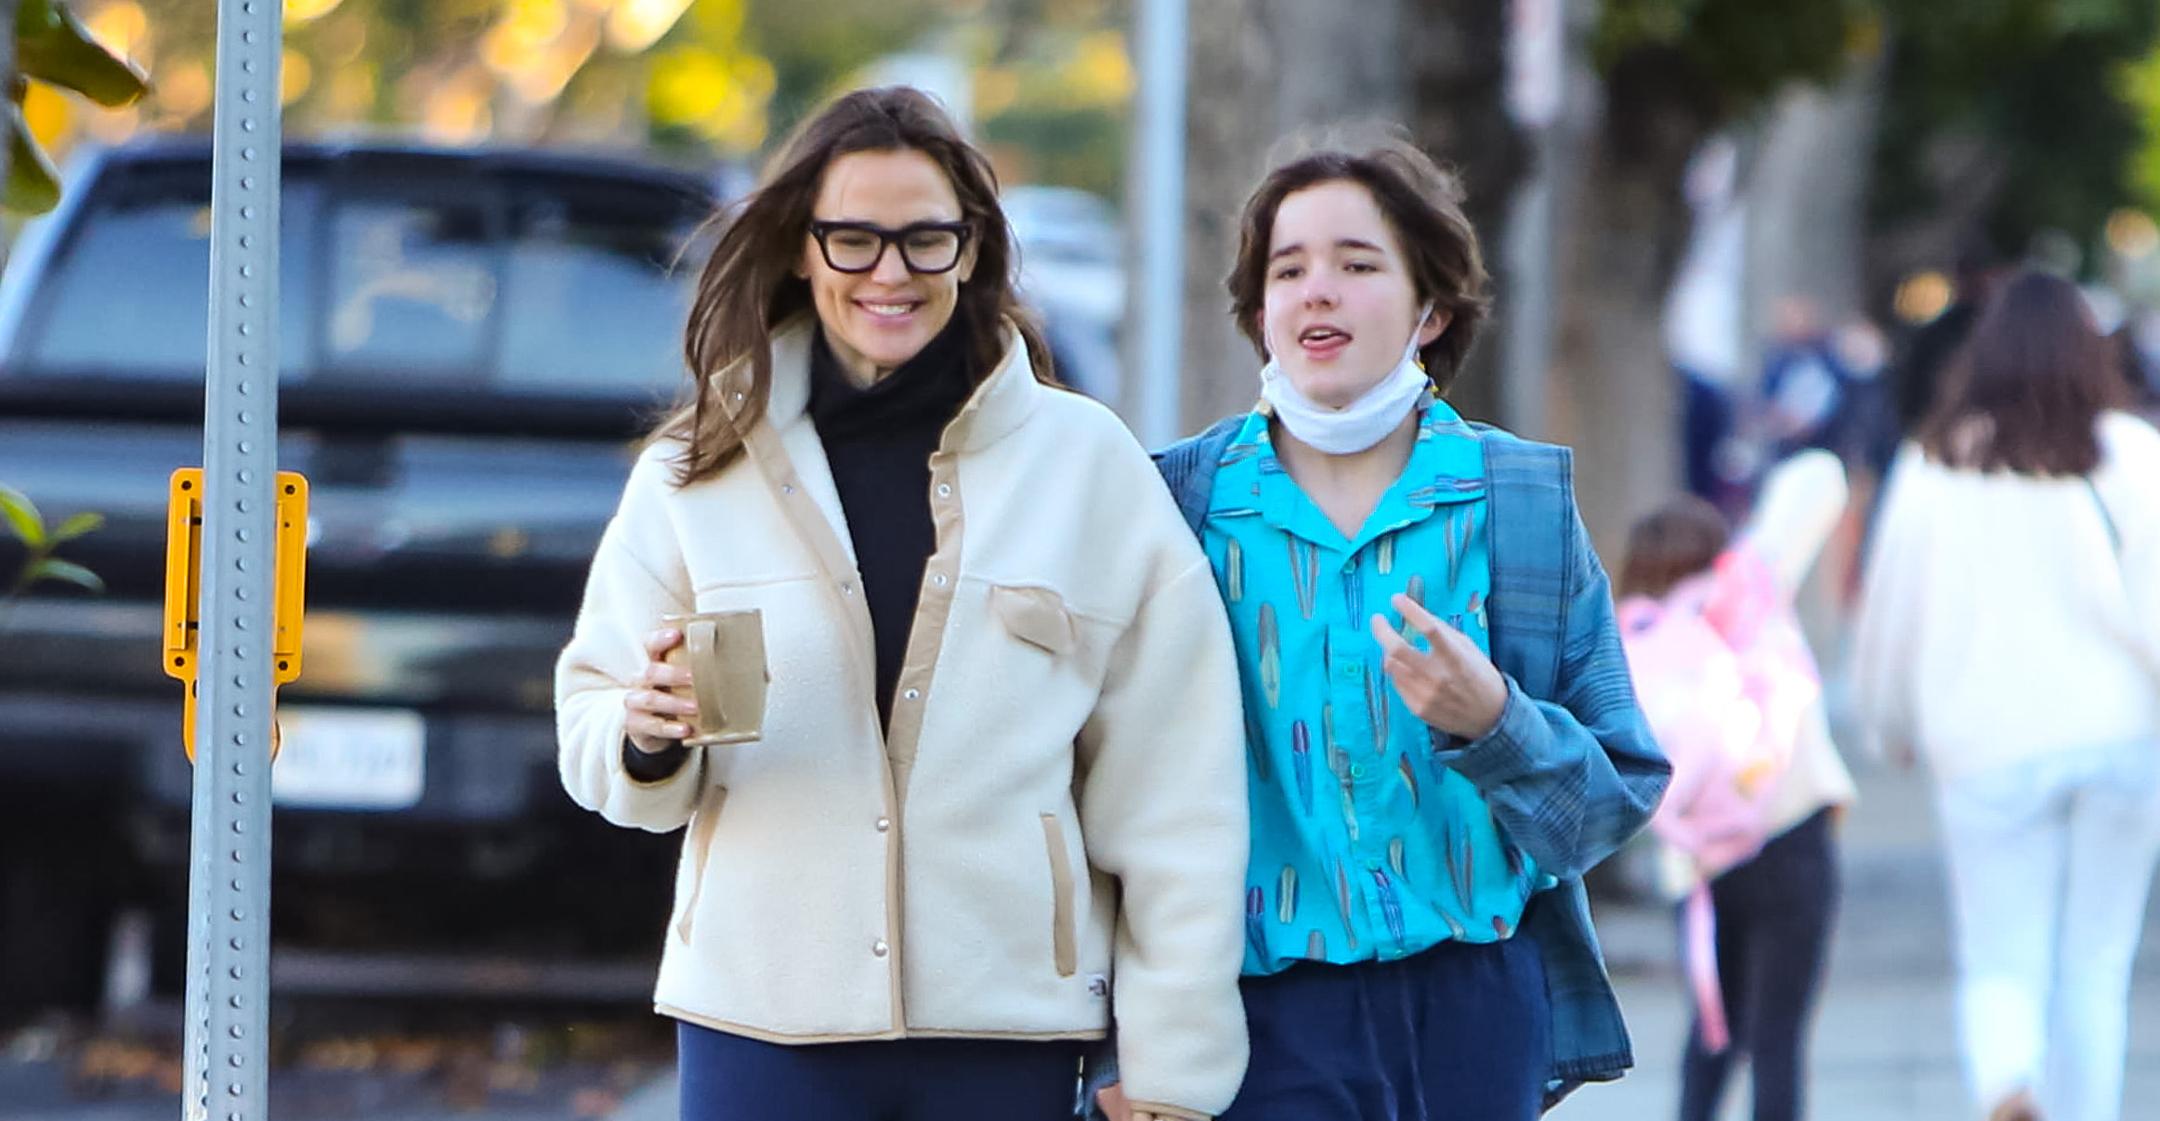 Jennifer Garner Says It 'Was Amazing' To Watch 'Juno' With Her Daughter